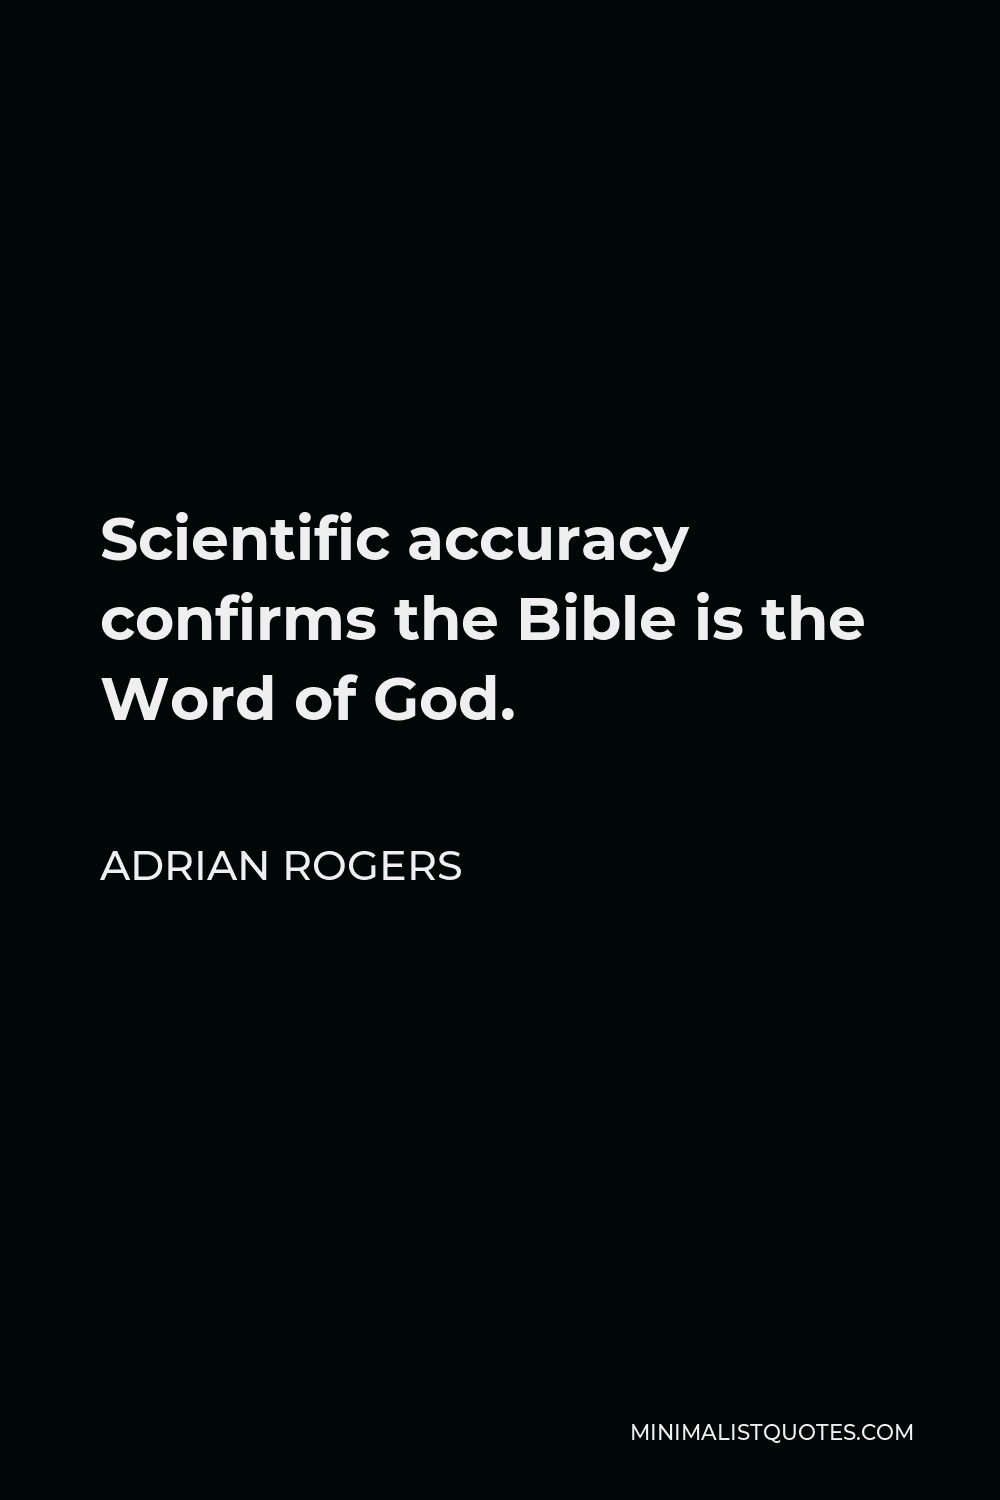 Adrian Rogers Quote - Scientific accuracy confirms the Bible is the Word of God.